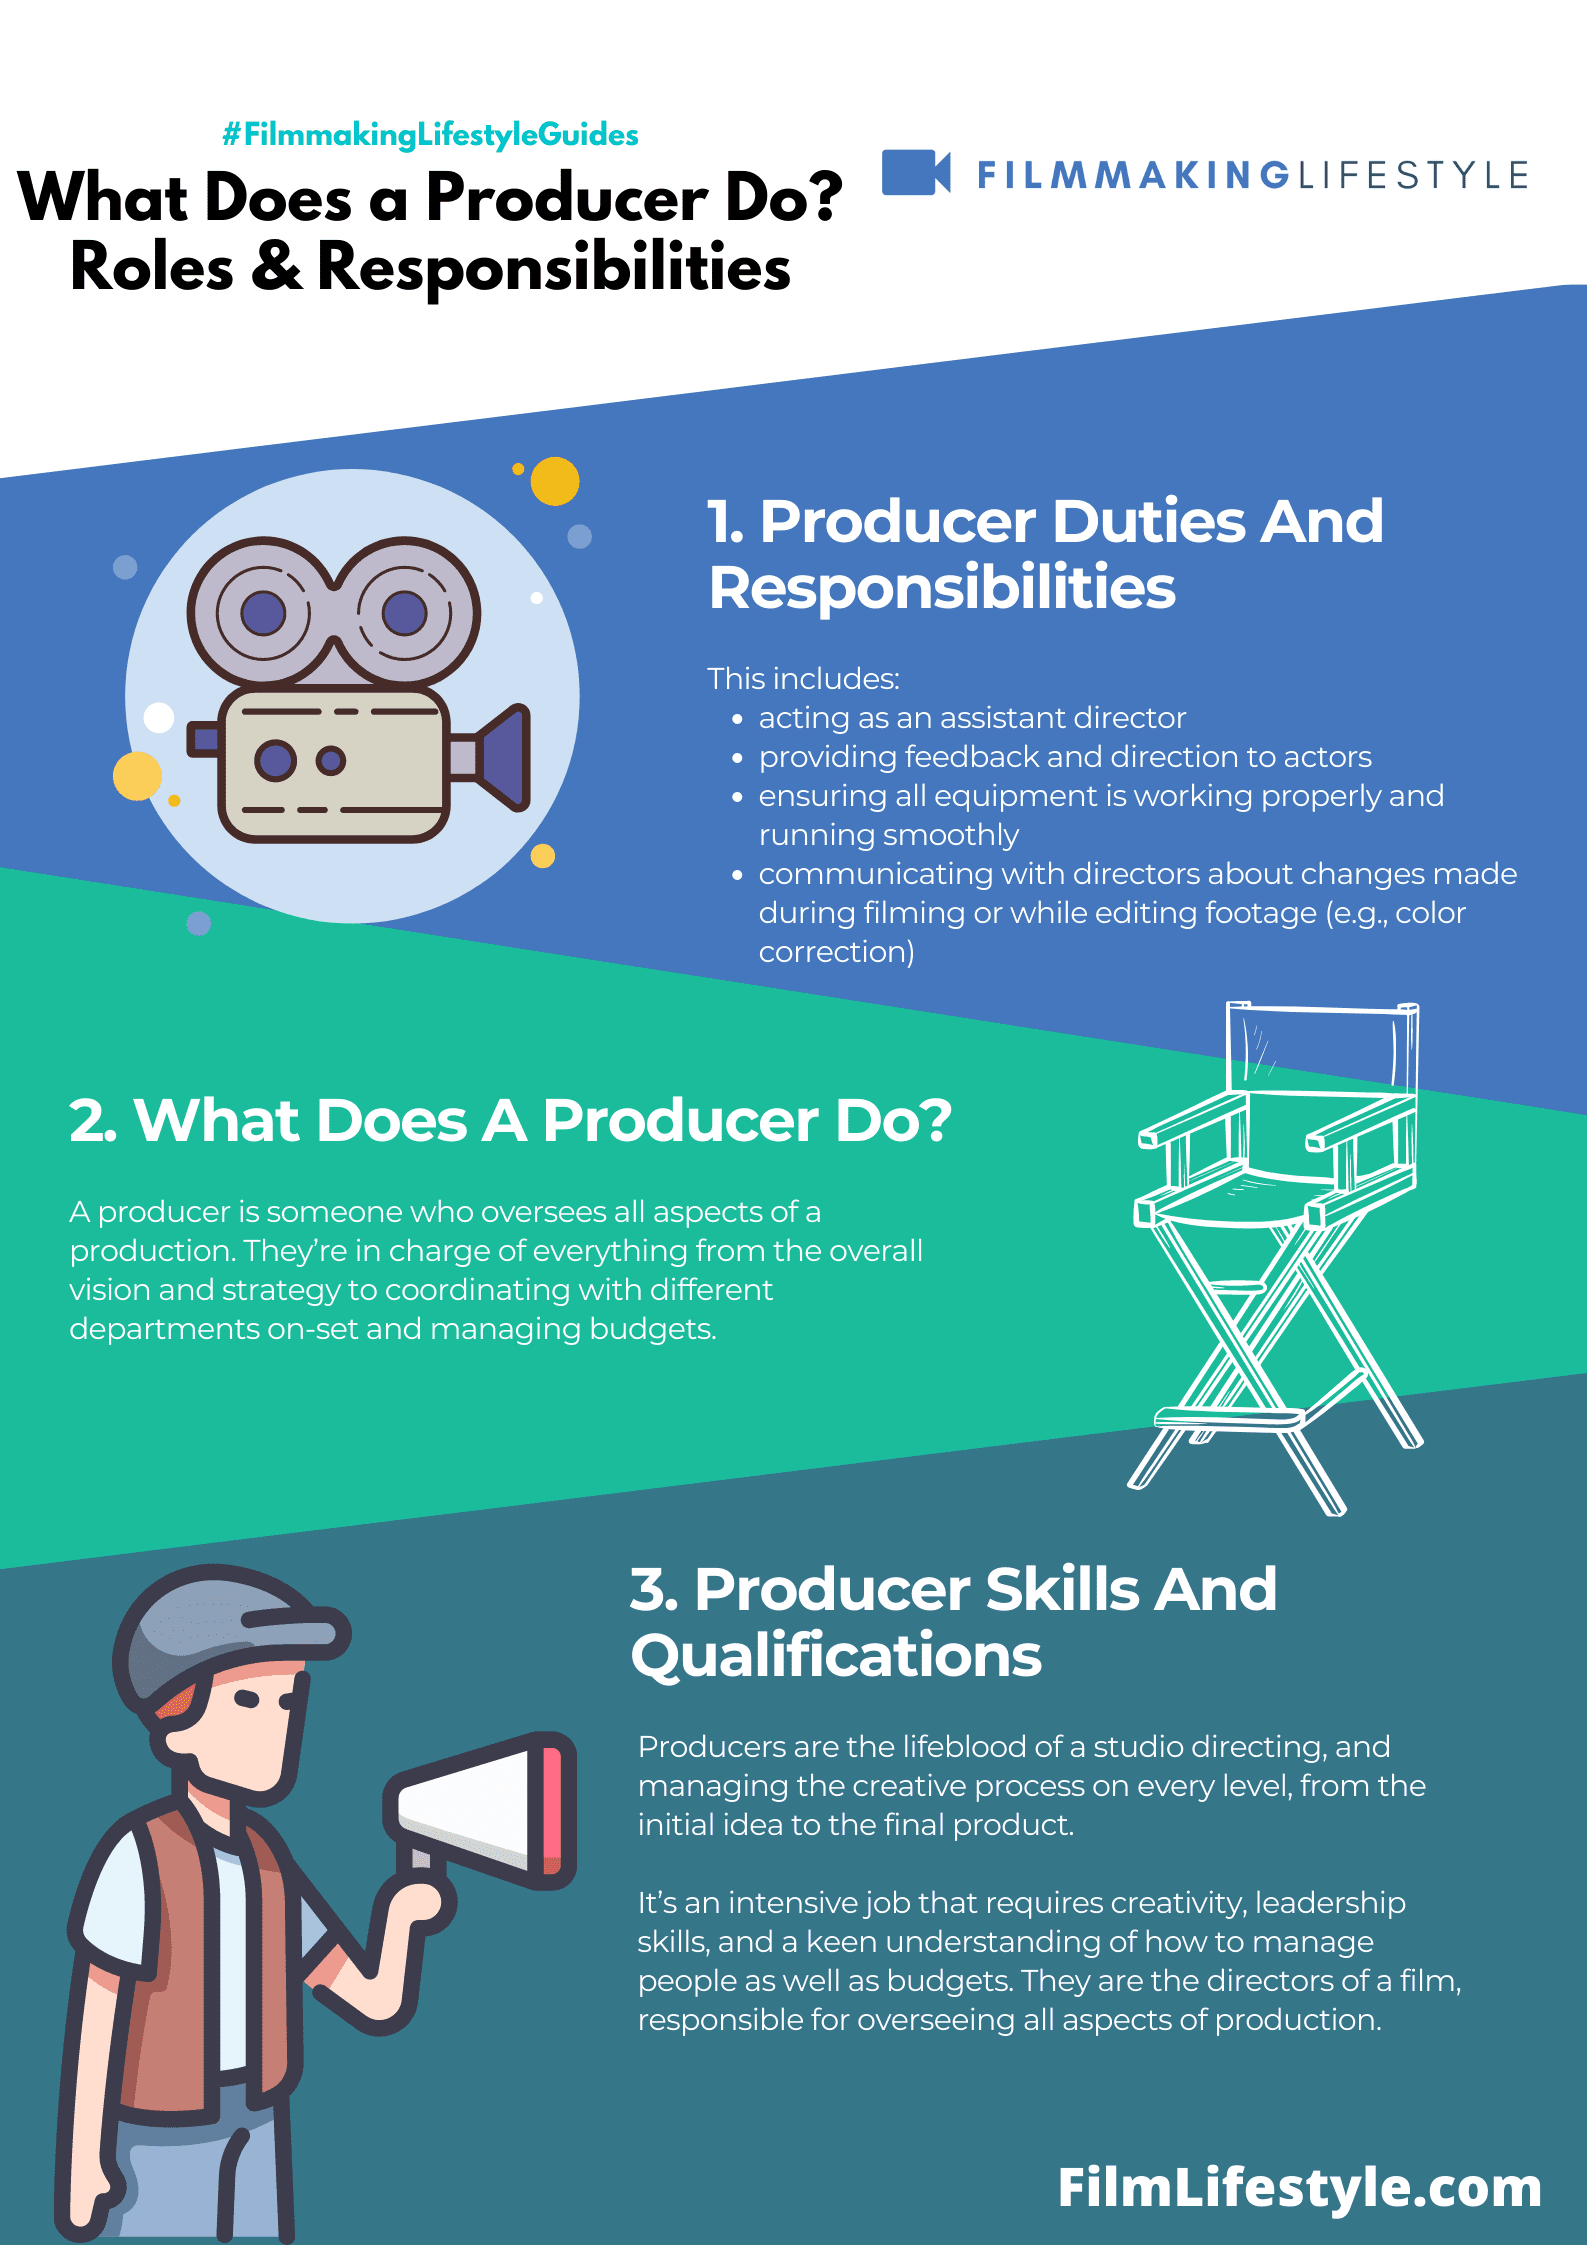 What Does a Producer Do